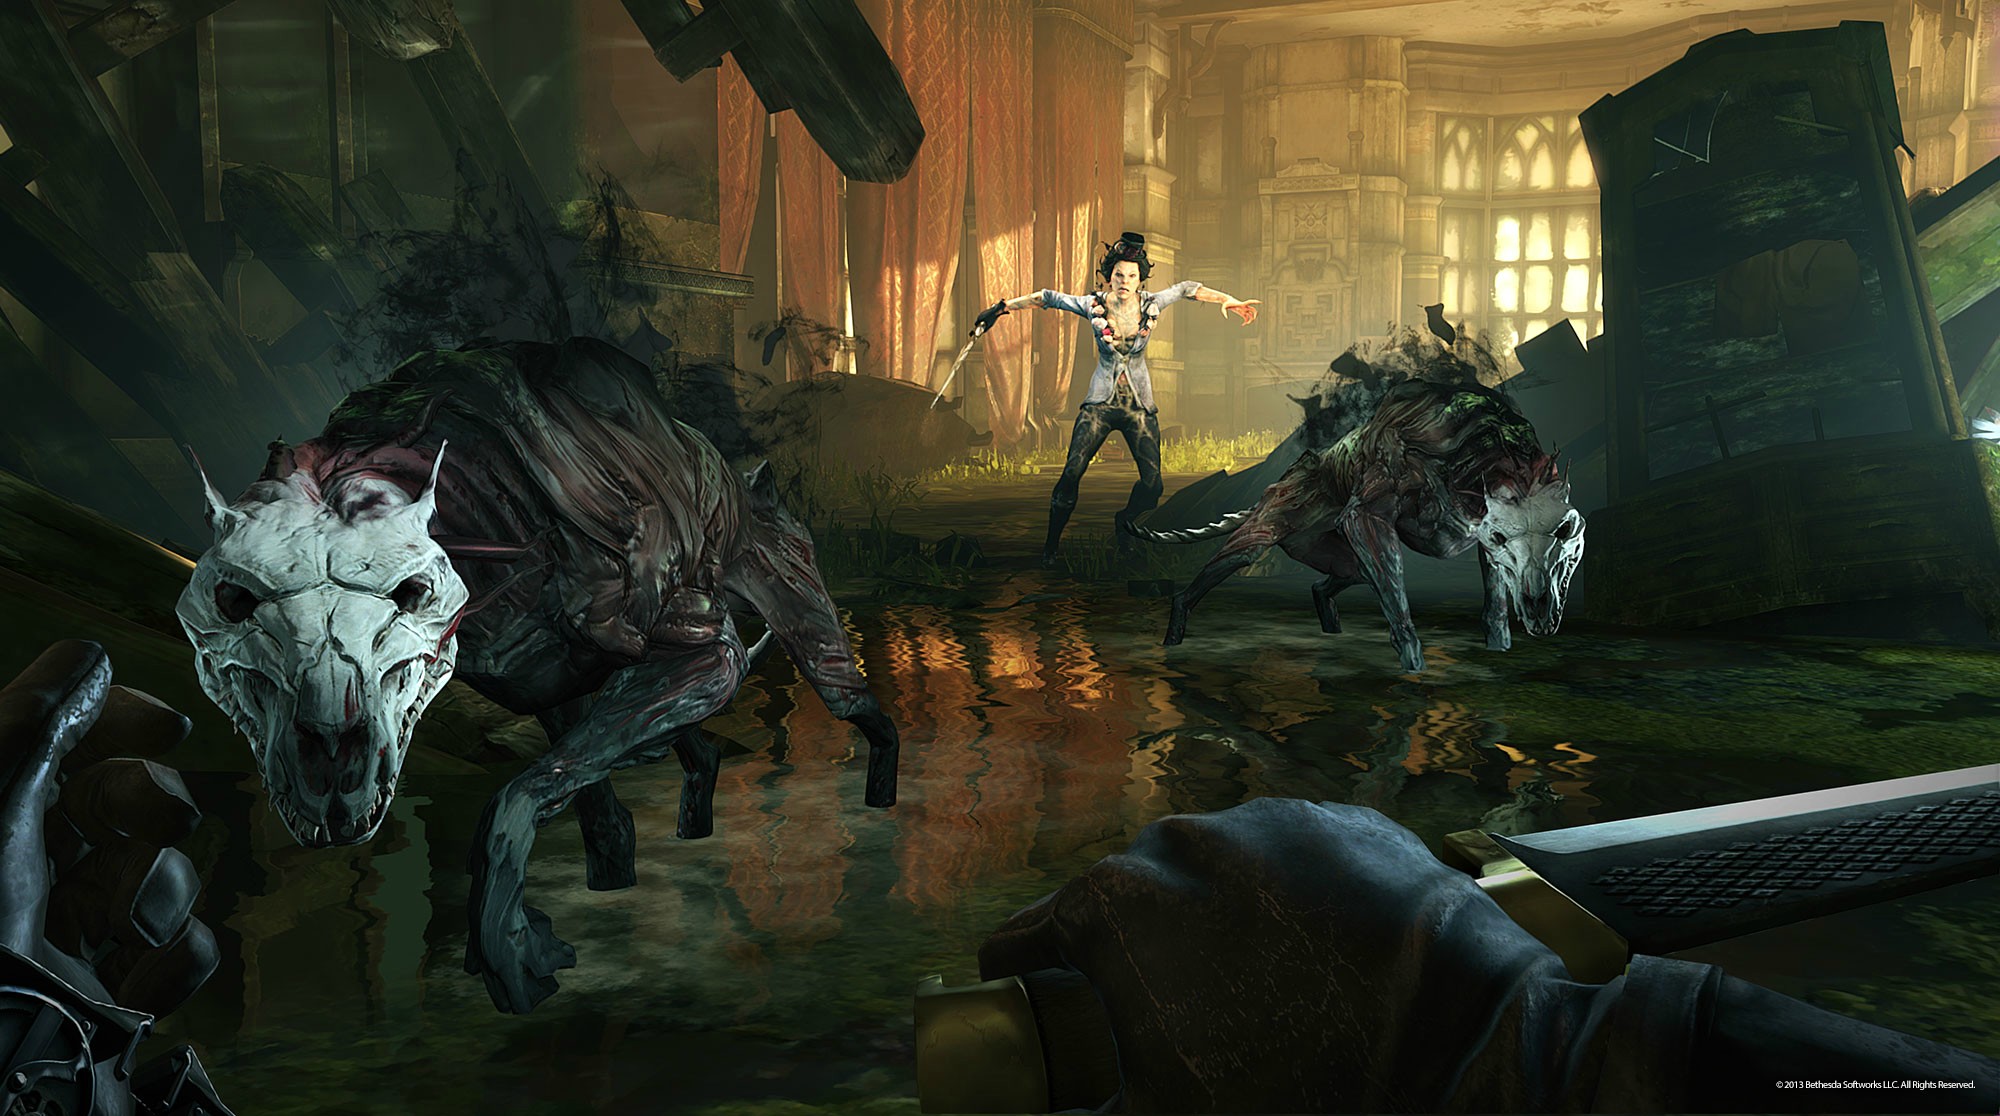 Download Latest HD Wallpaper of, Games, Dishonored